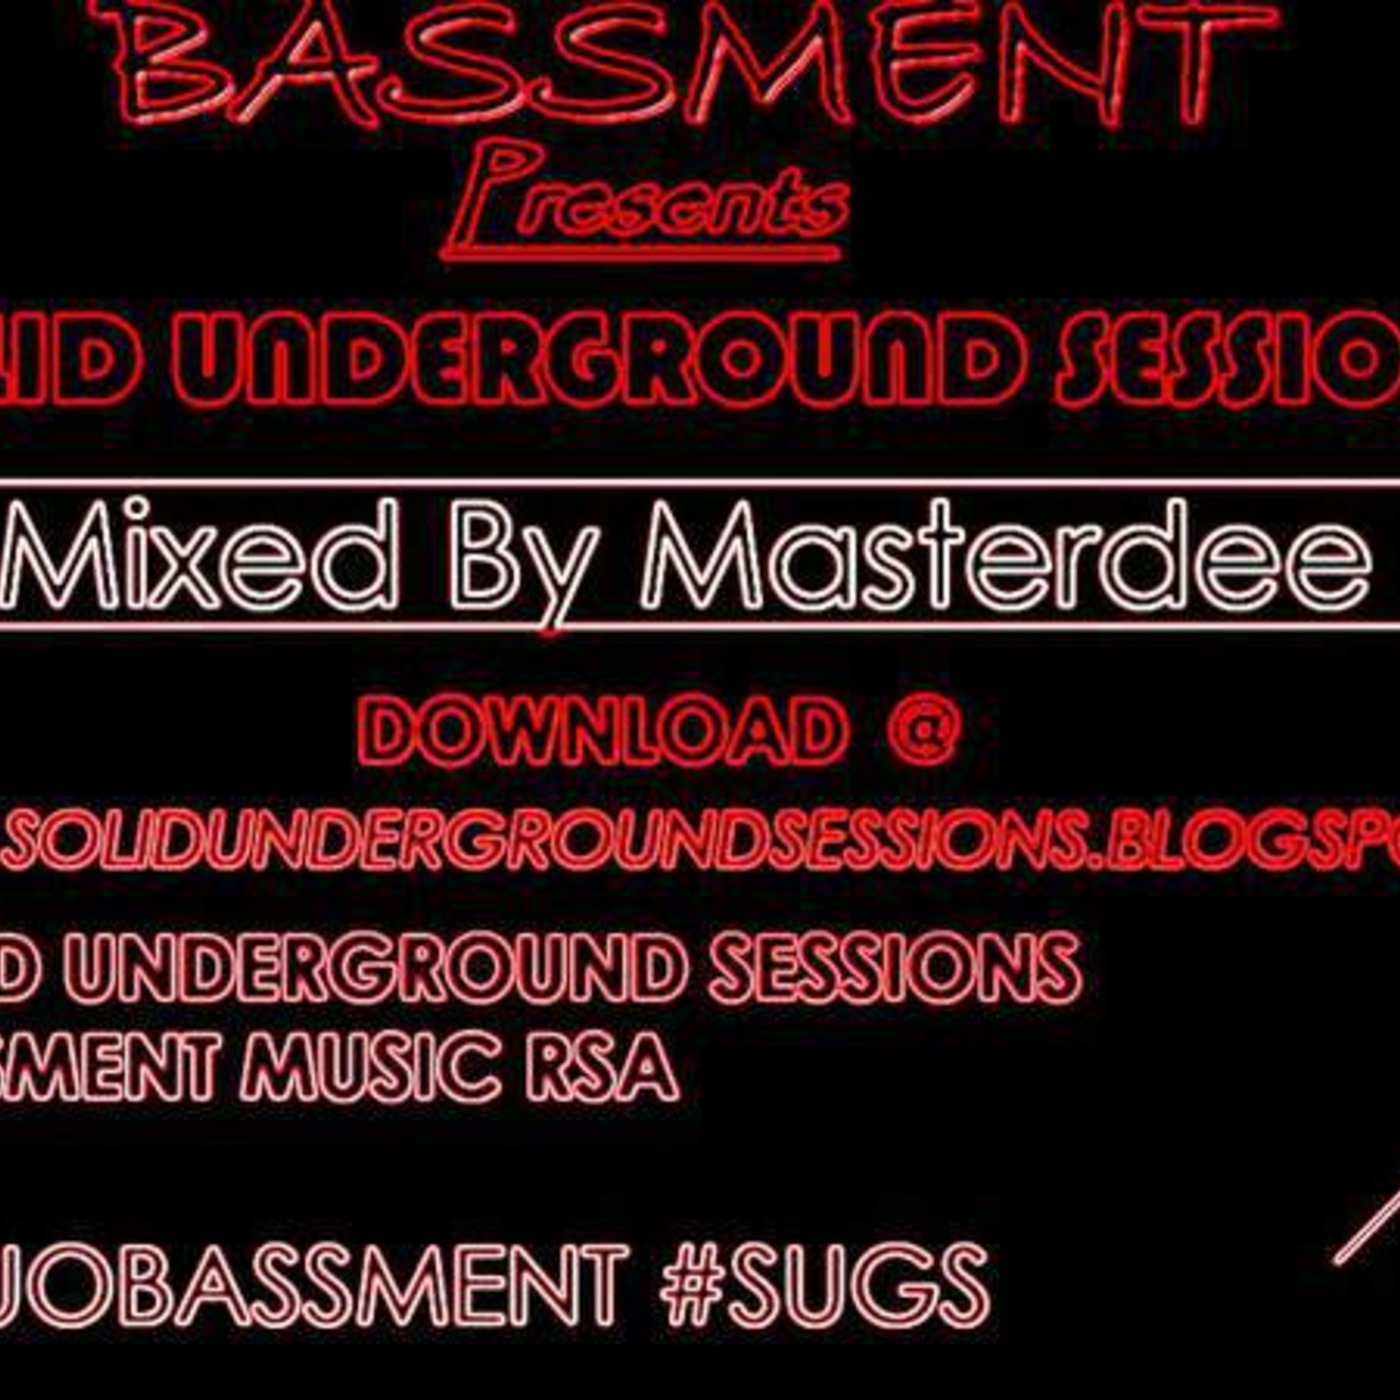 #9 Mixed By Masterdee #SUGS